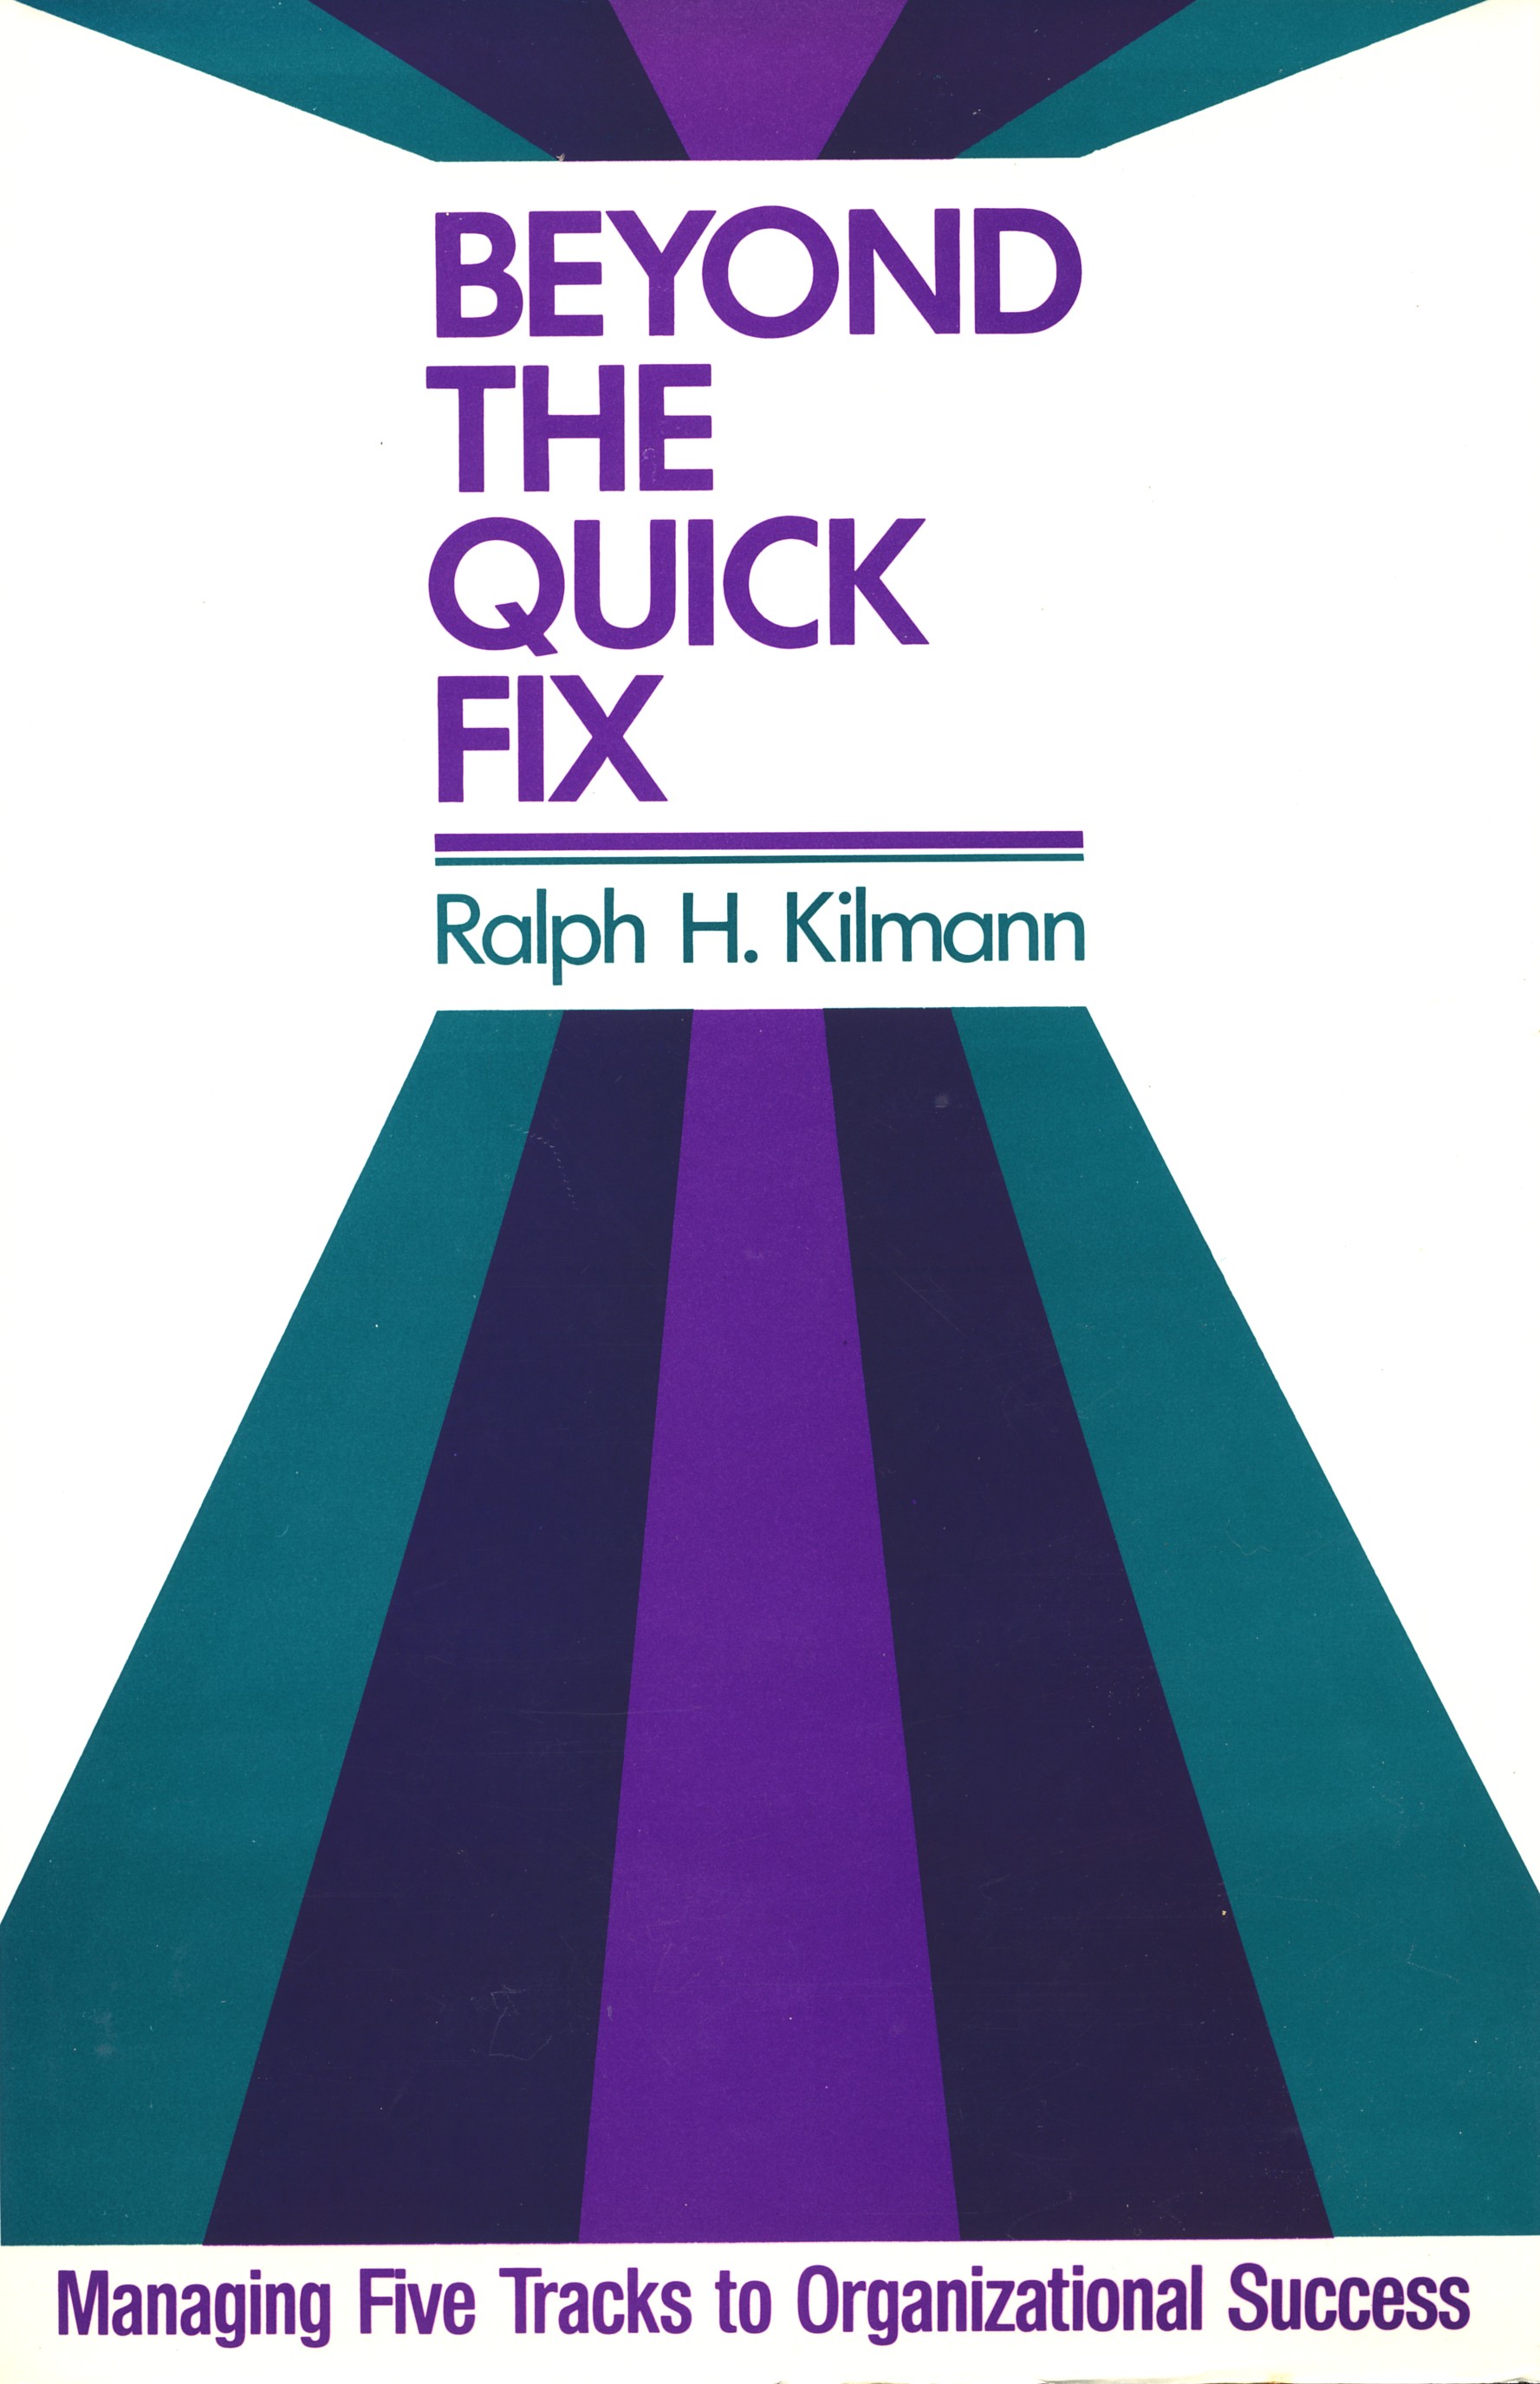 Beyond the Quick Fix